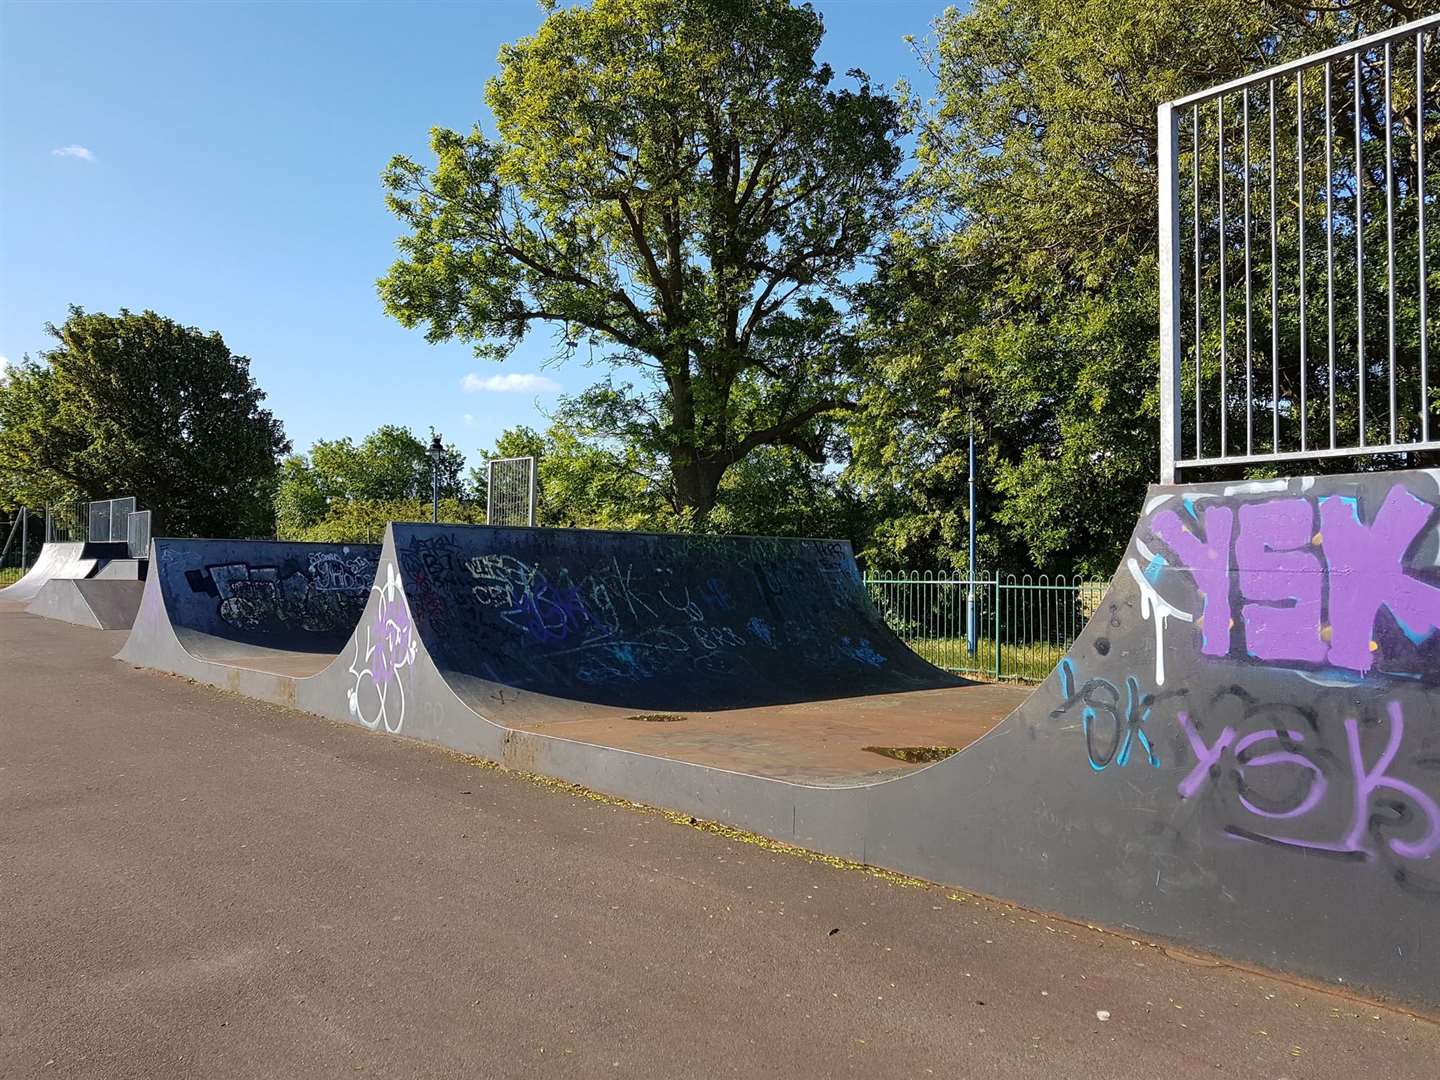 Skaters say the existing facilities at Swanley skate park at St Mary's Recreation Ground are in need of an update.